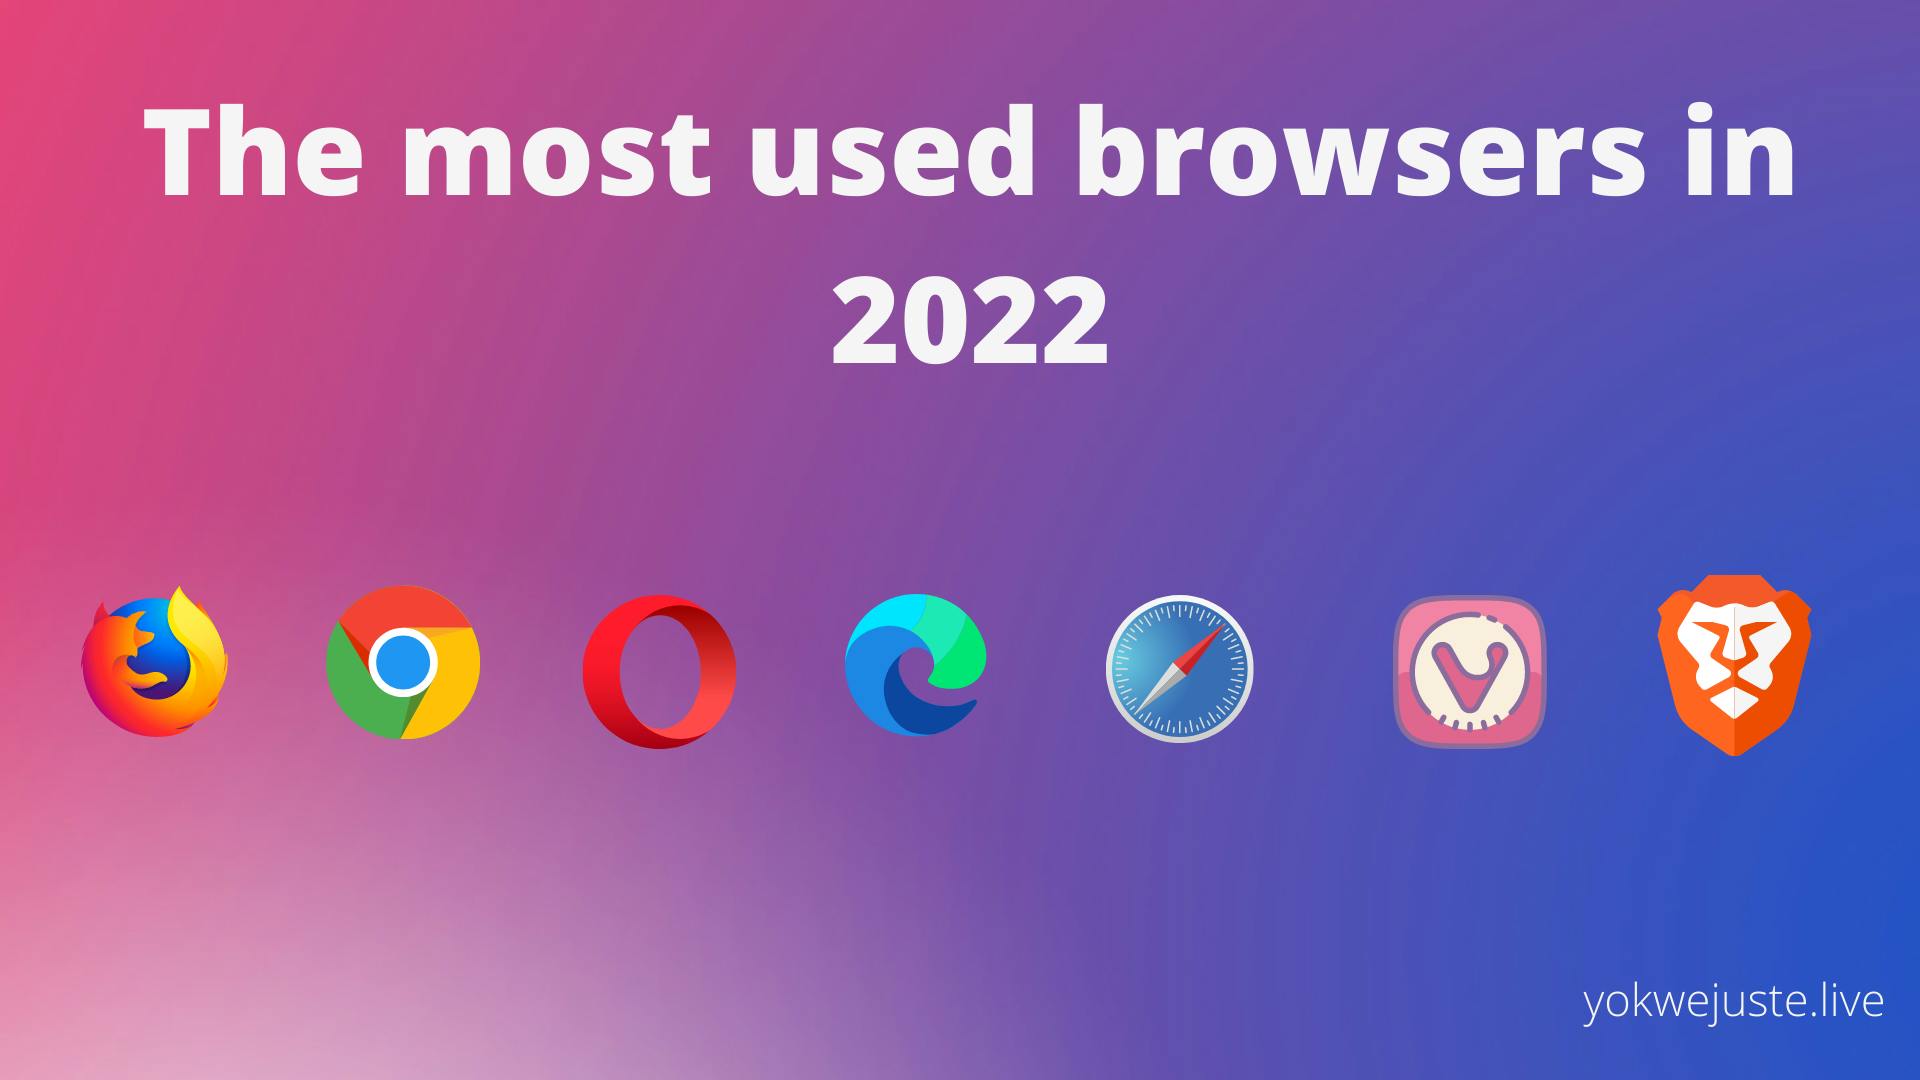 The most used browsers in 2022